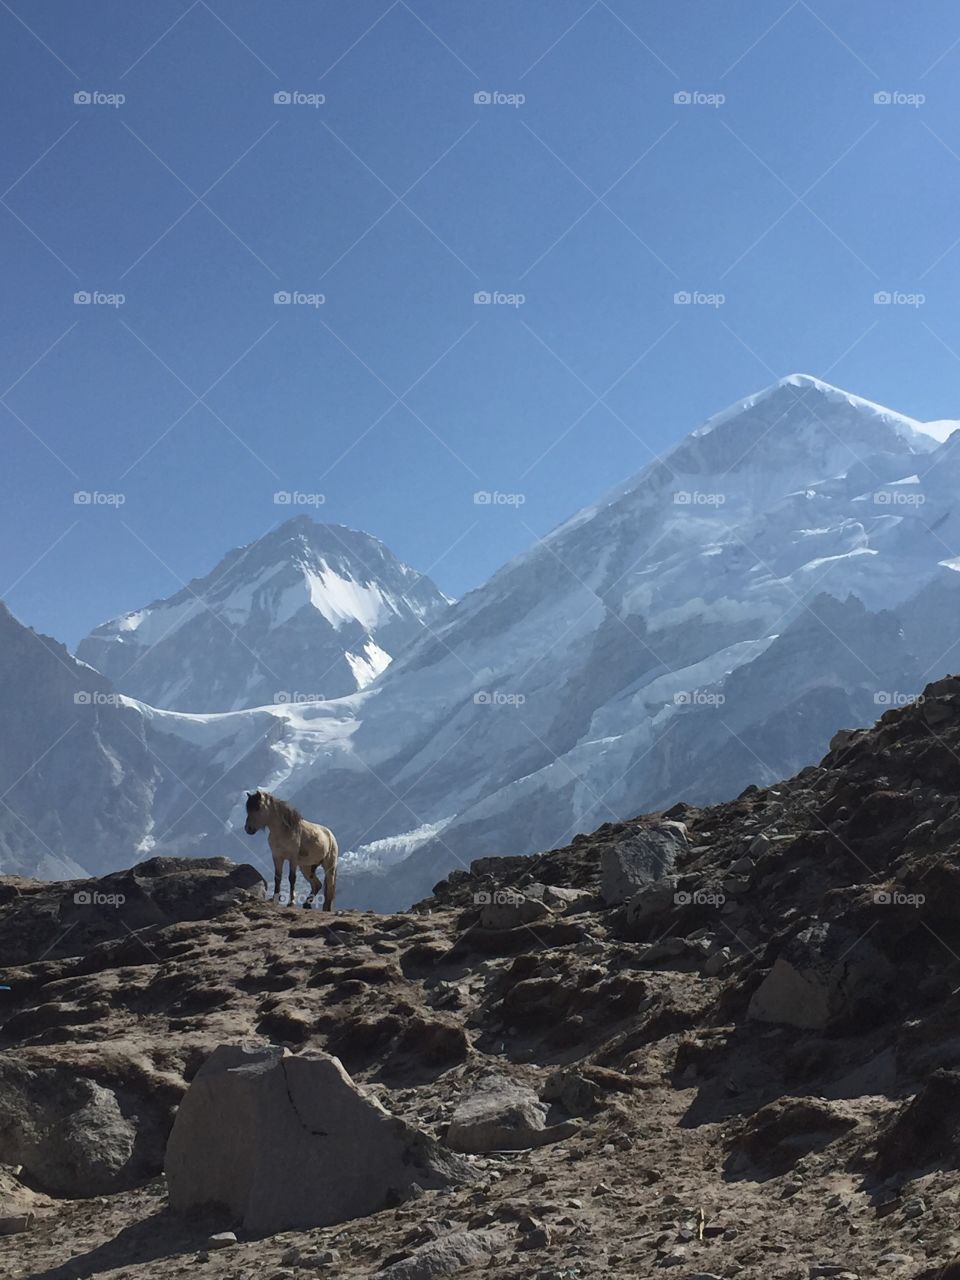 A wild horse in the Khumbu region of Nepal in the Himalayan Mountains.